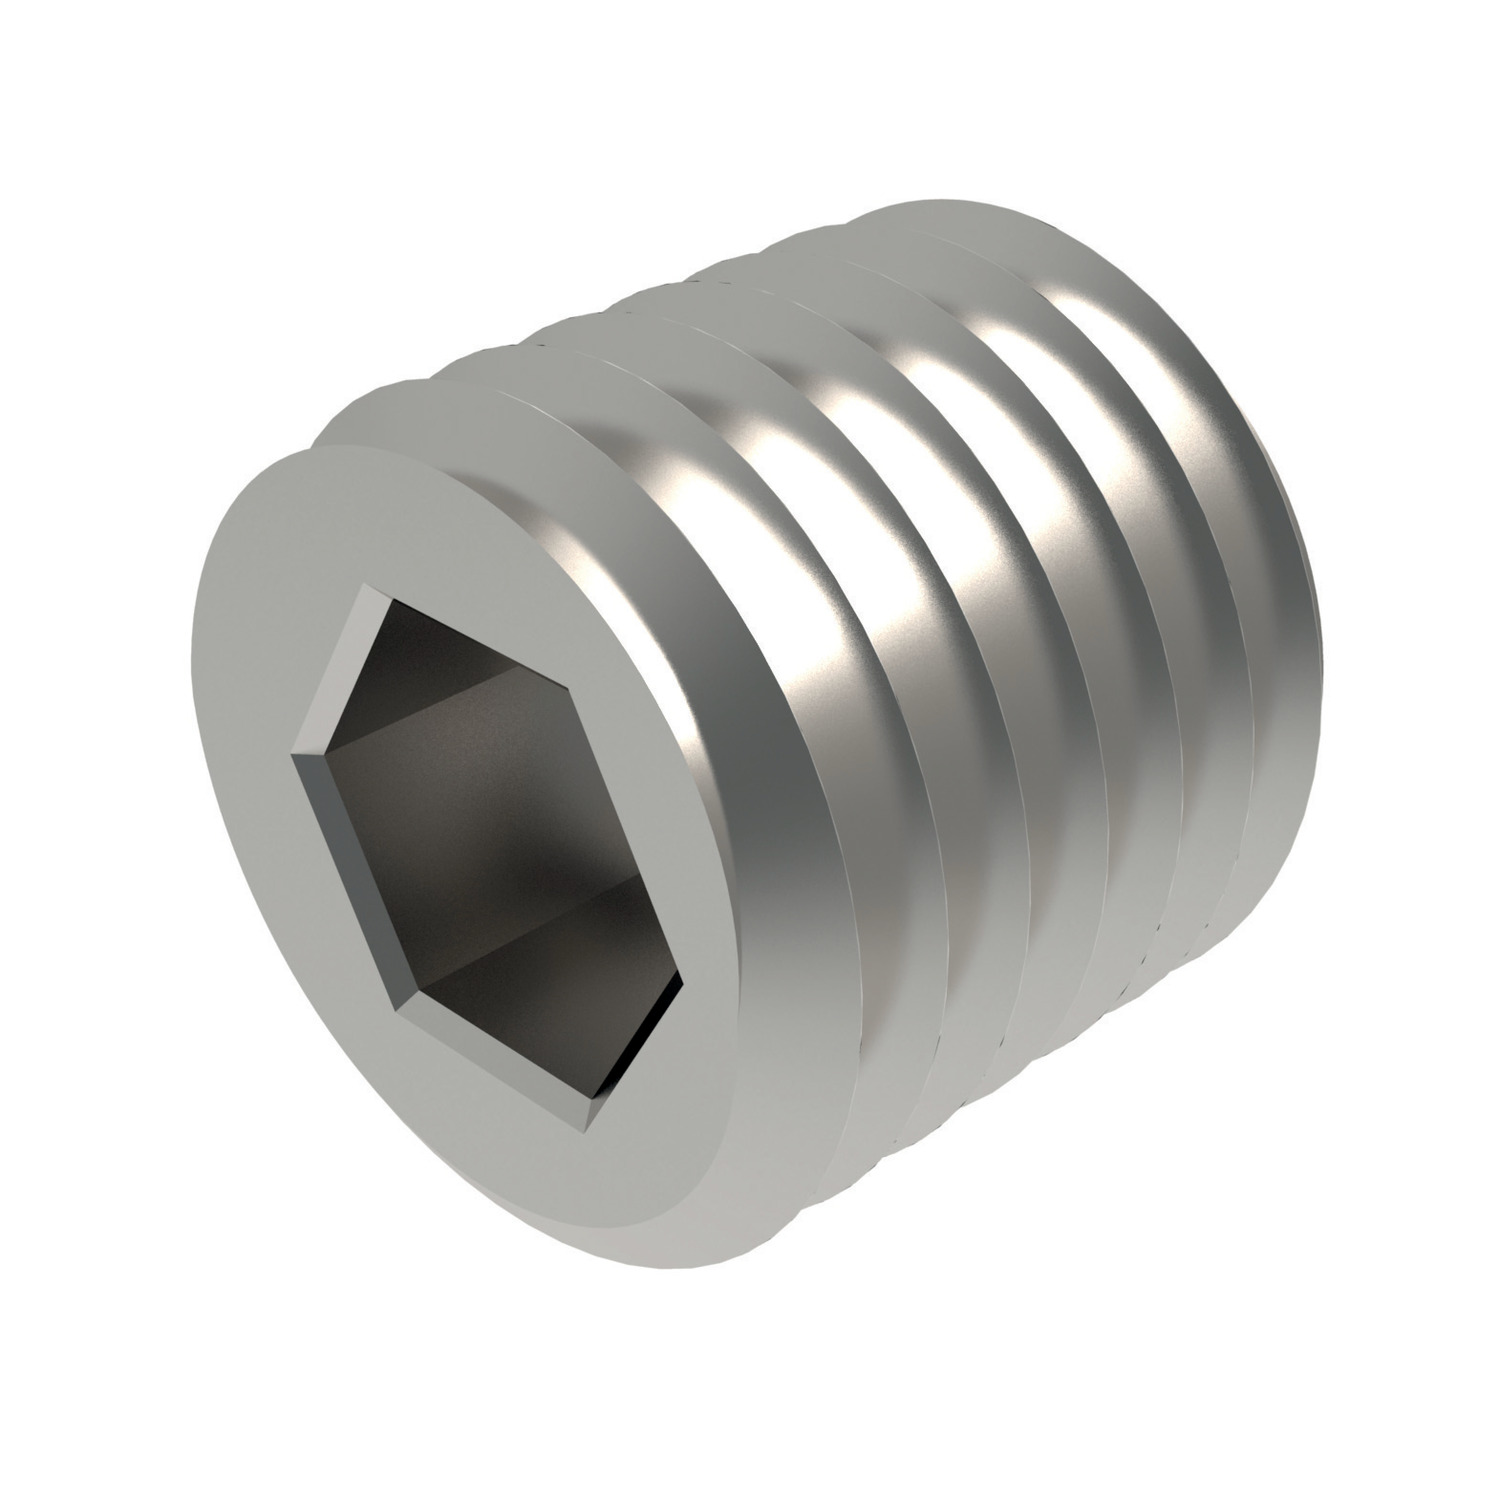 Product P0199, Metric Threaded Restrictors Stainless Steel / 